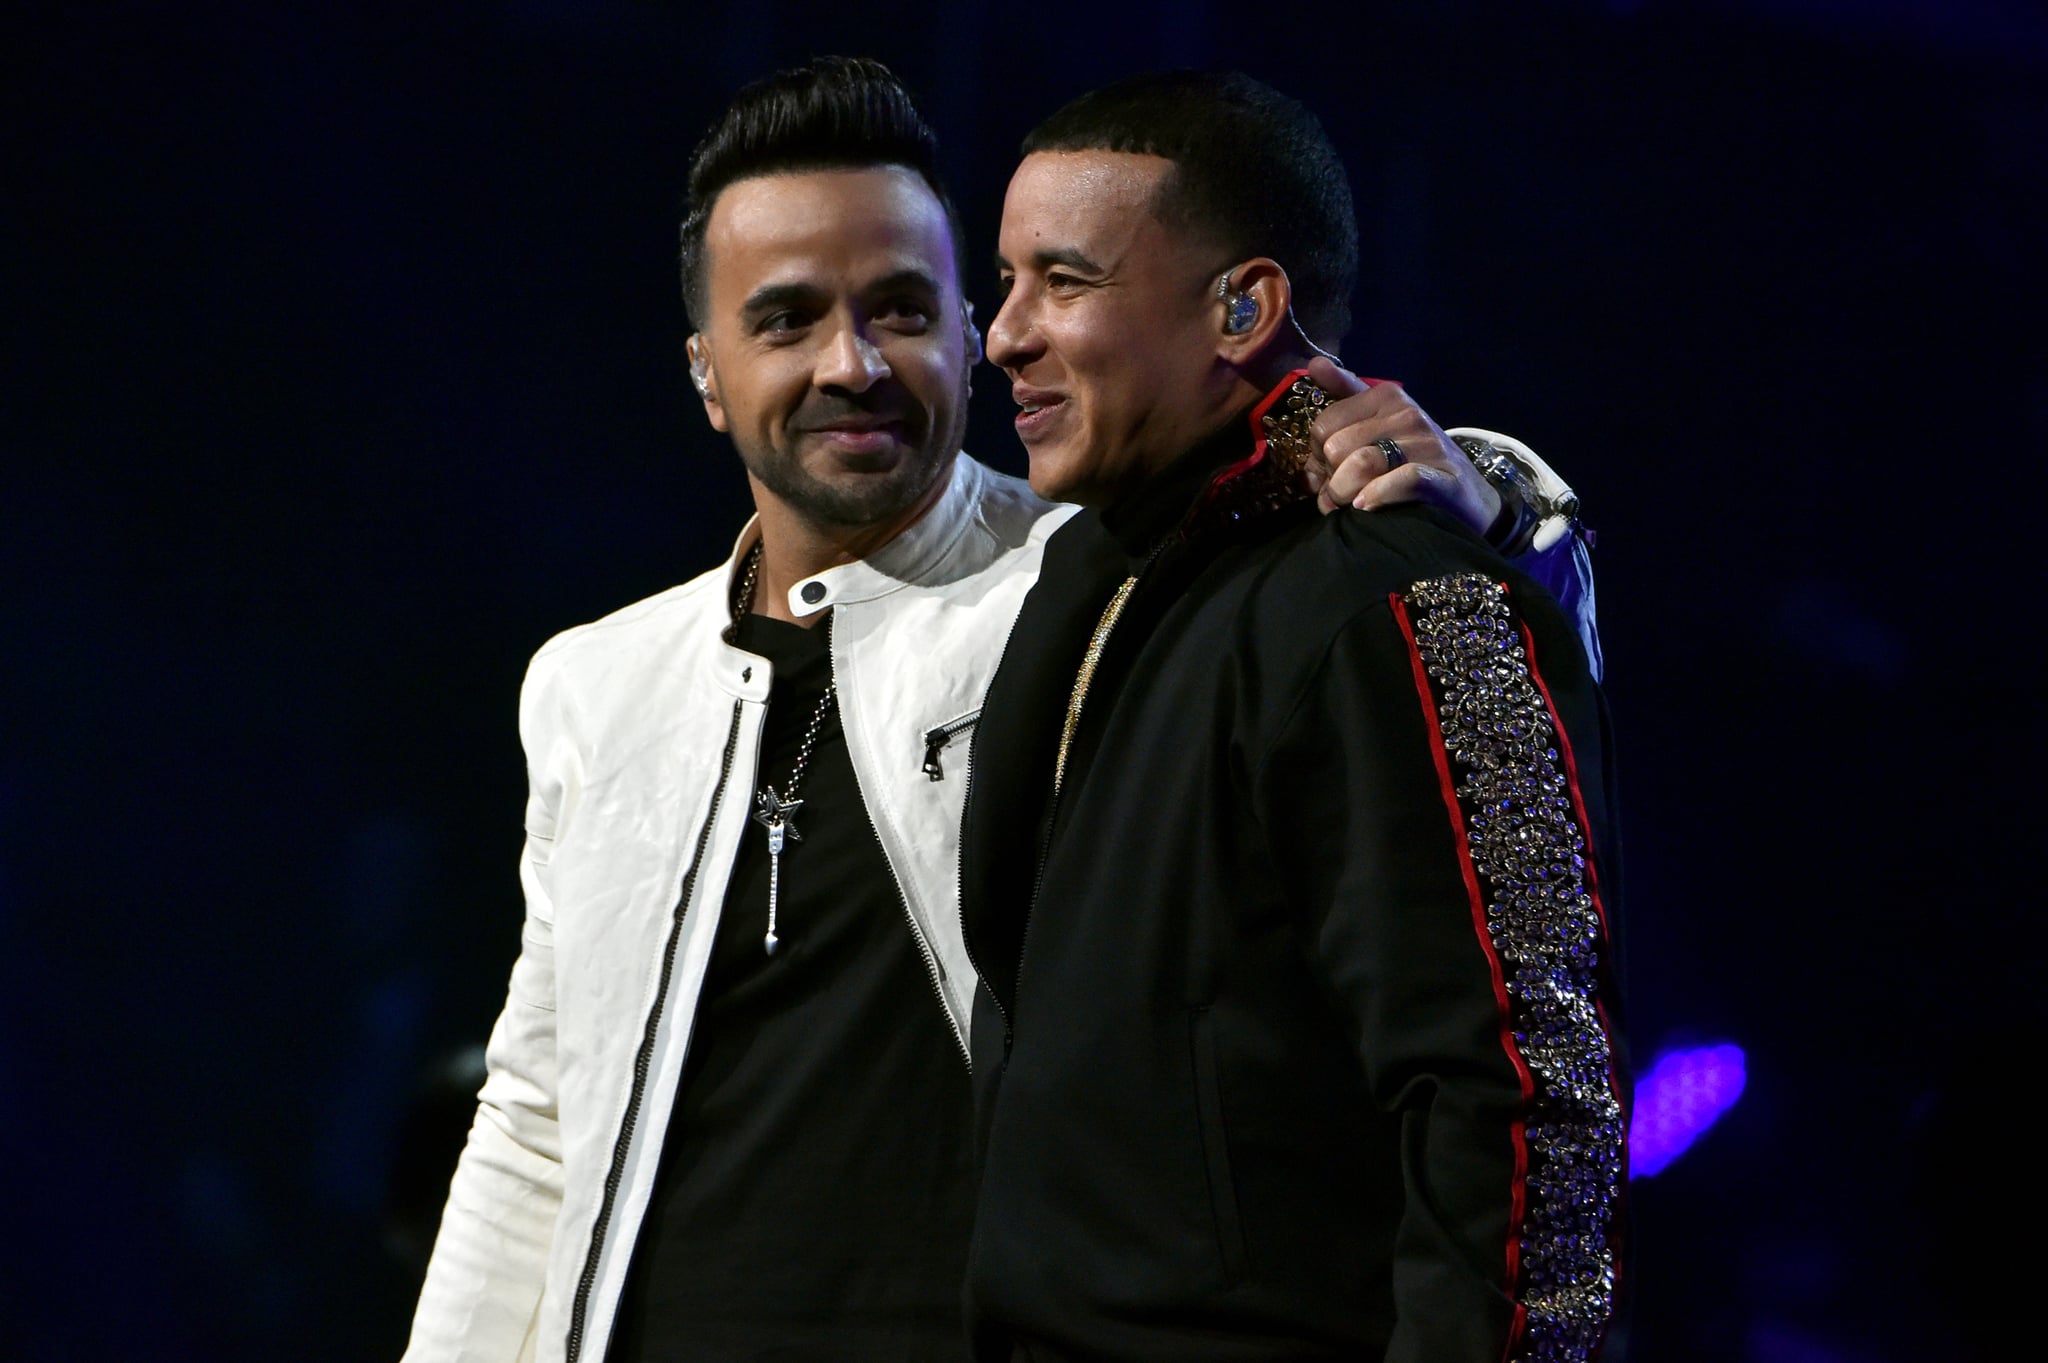 Luis Fonsi and Daddy Yankee gave an electrifying performance of their hit "Despacito" in 2018.